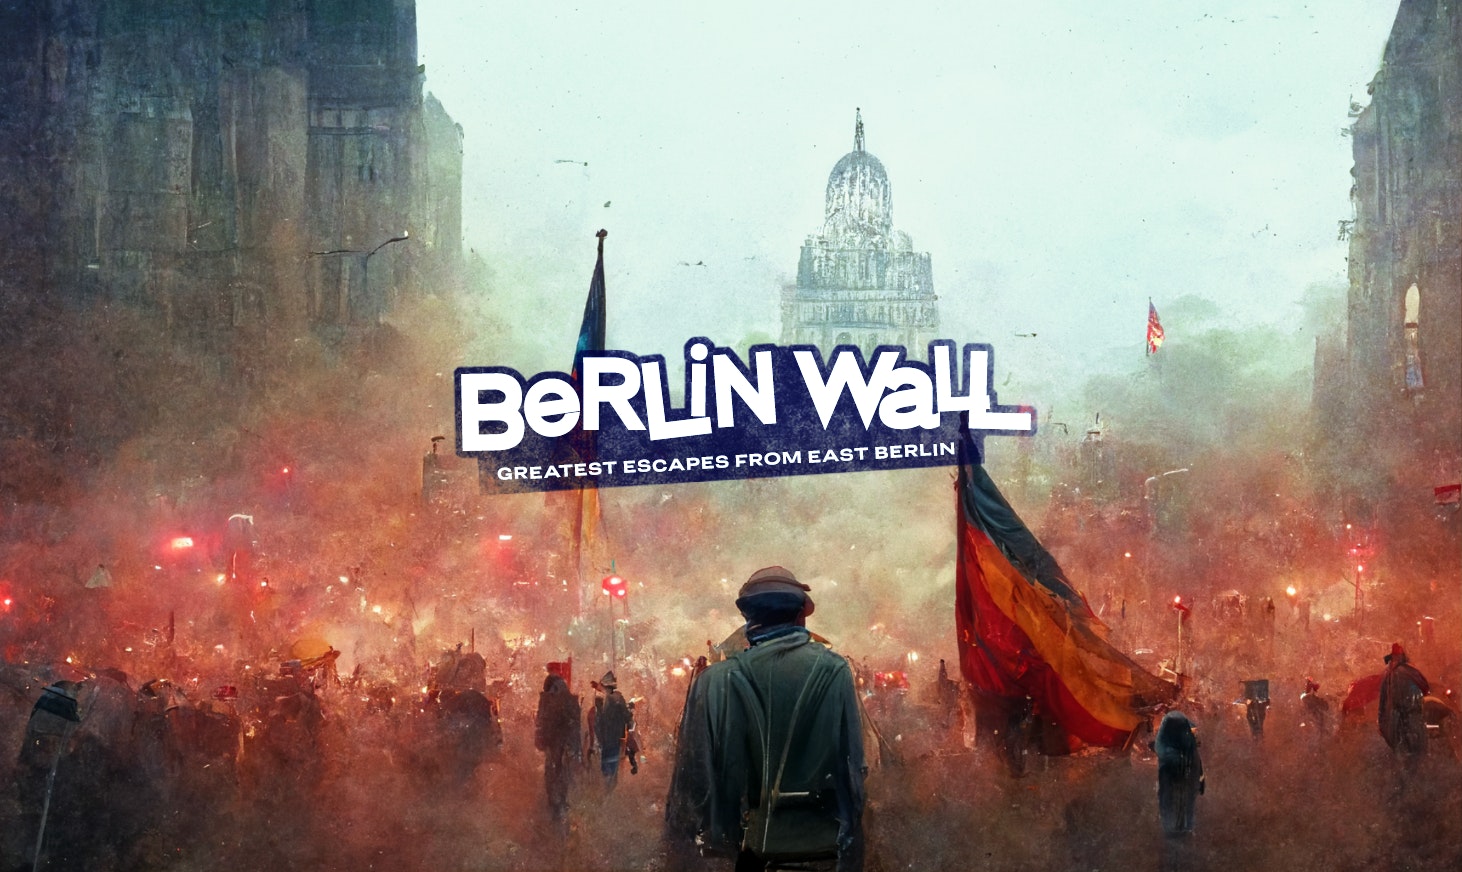 Berlin Wall: Greatest Escapes from East Berlin